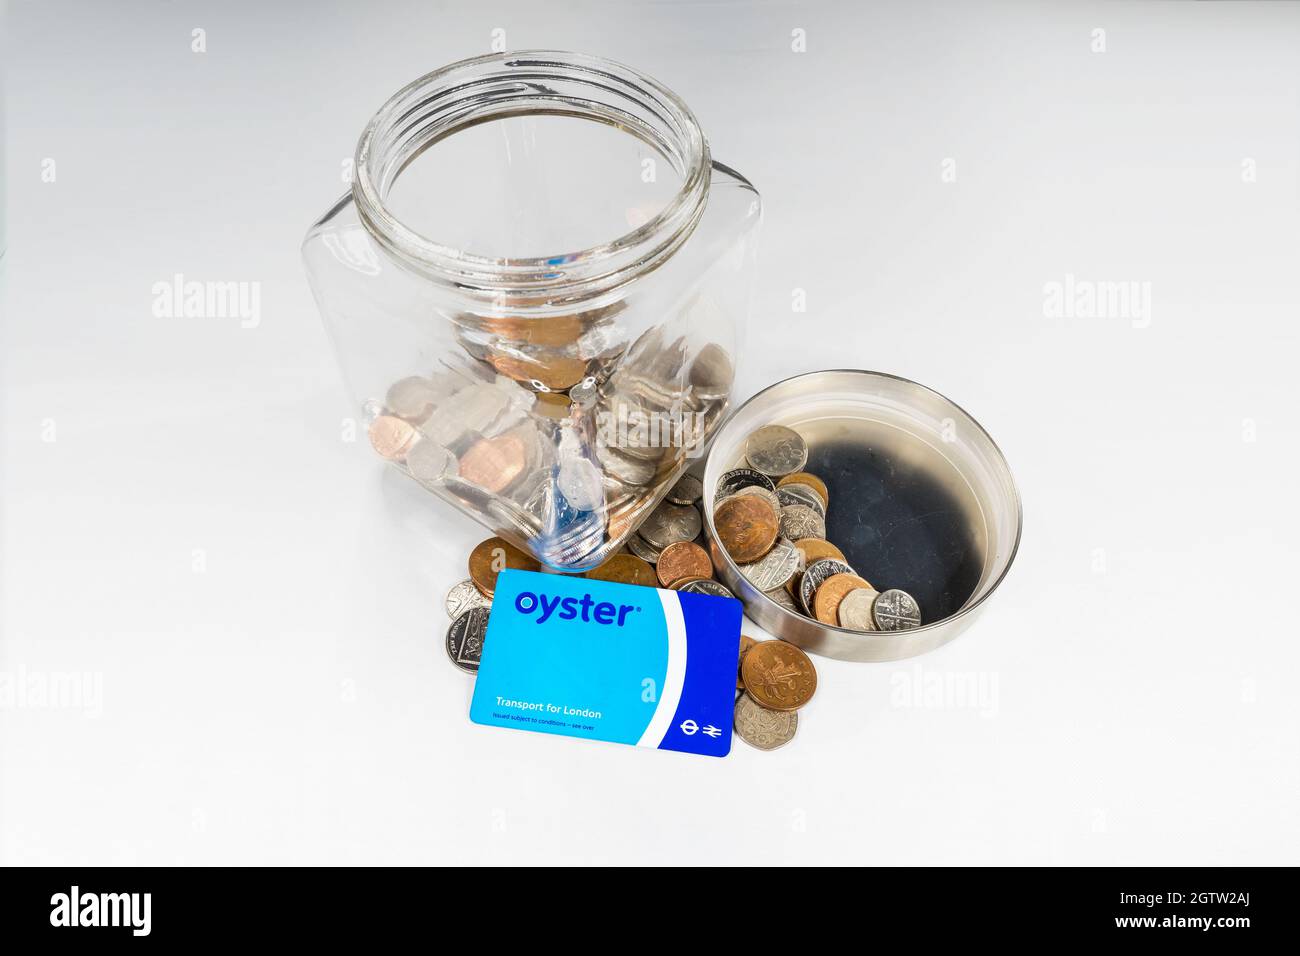 Oyster prepaid travel card in front of a glass jar of loose change on a white background. Stock Photo